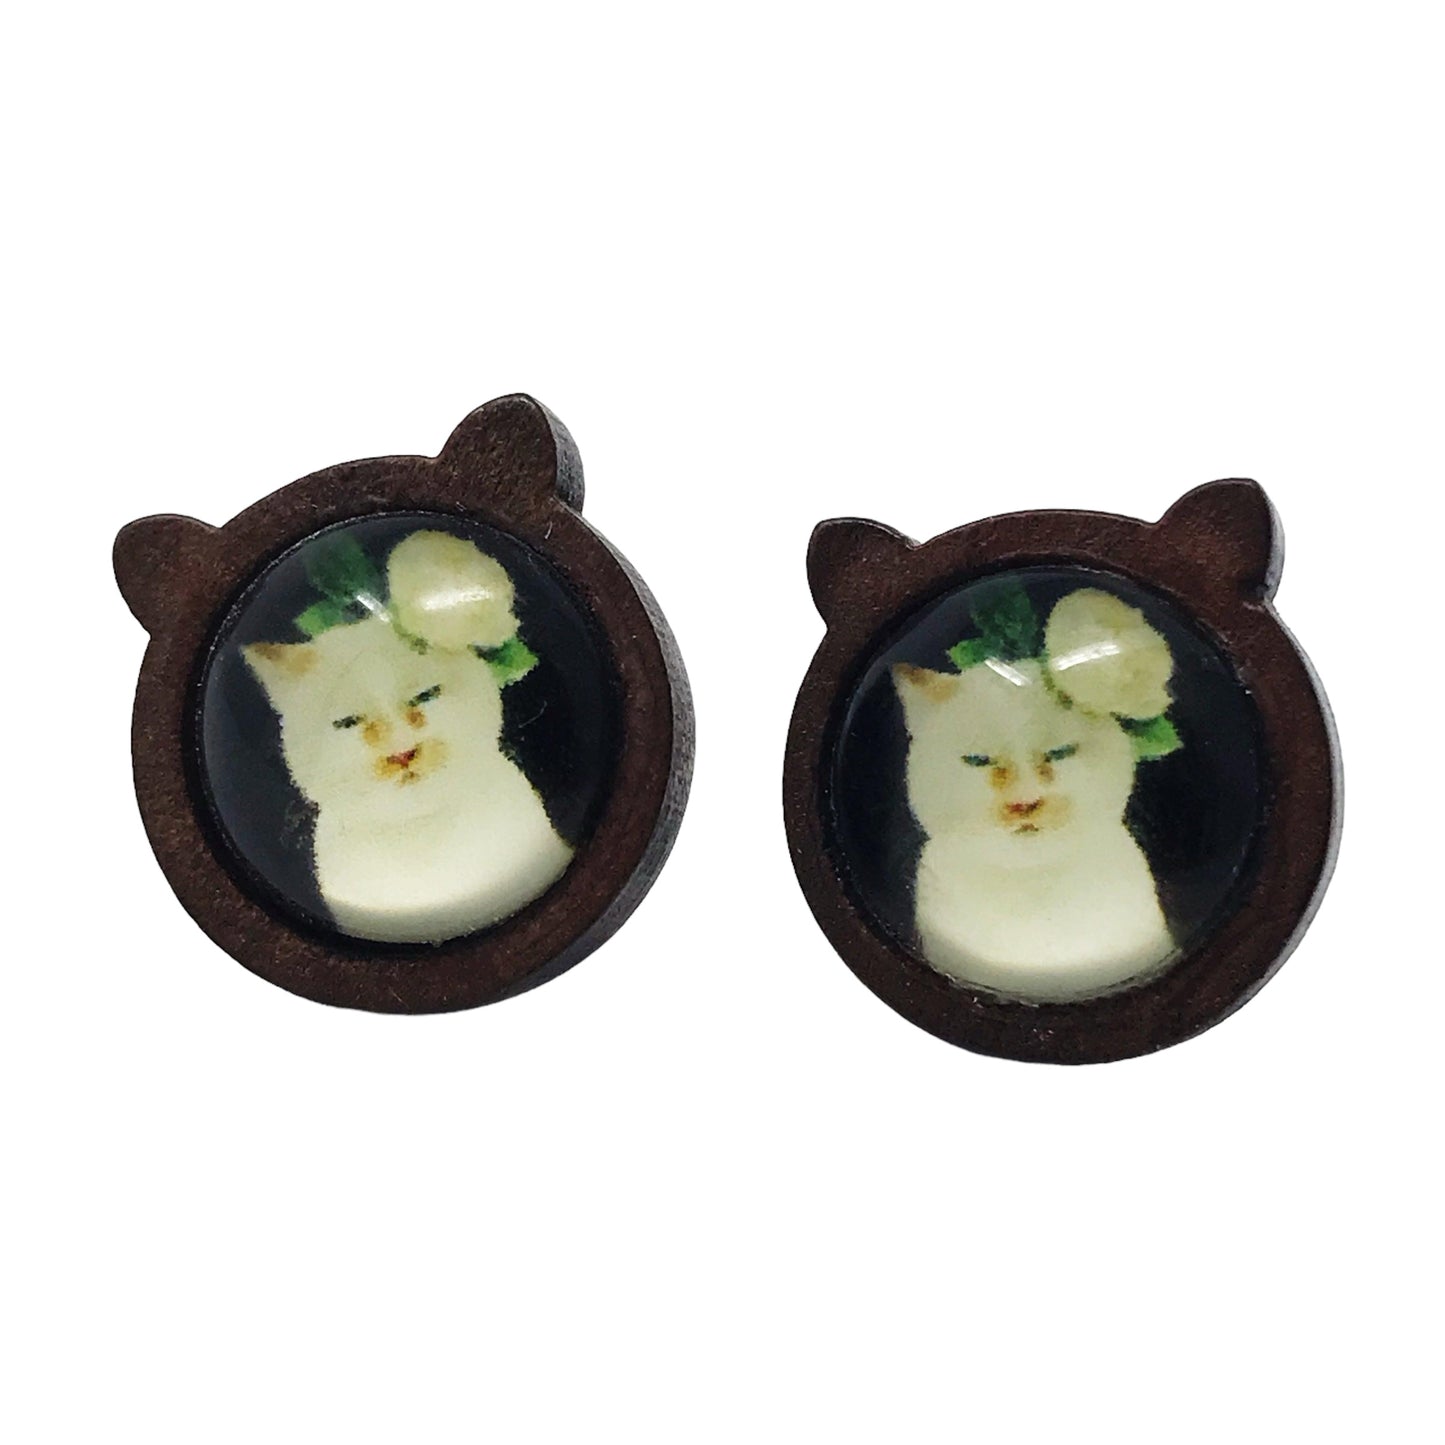 Whimsical Cat & Flower Earrings - Handmade Wooden Cat Shaped Jewelry for Stylish Cat Enthusiasts